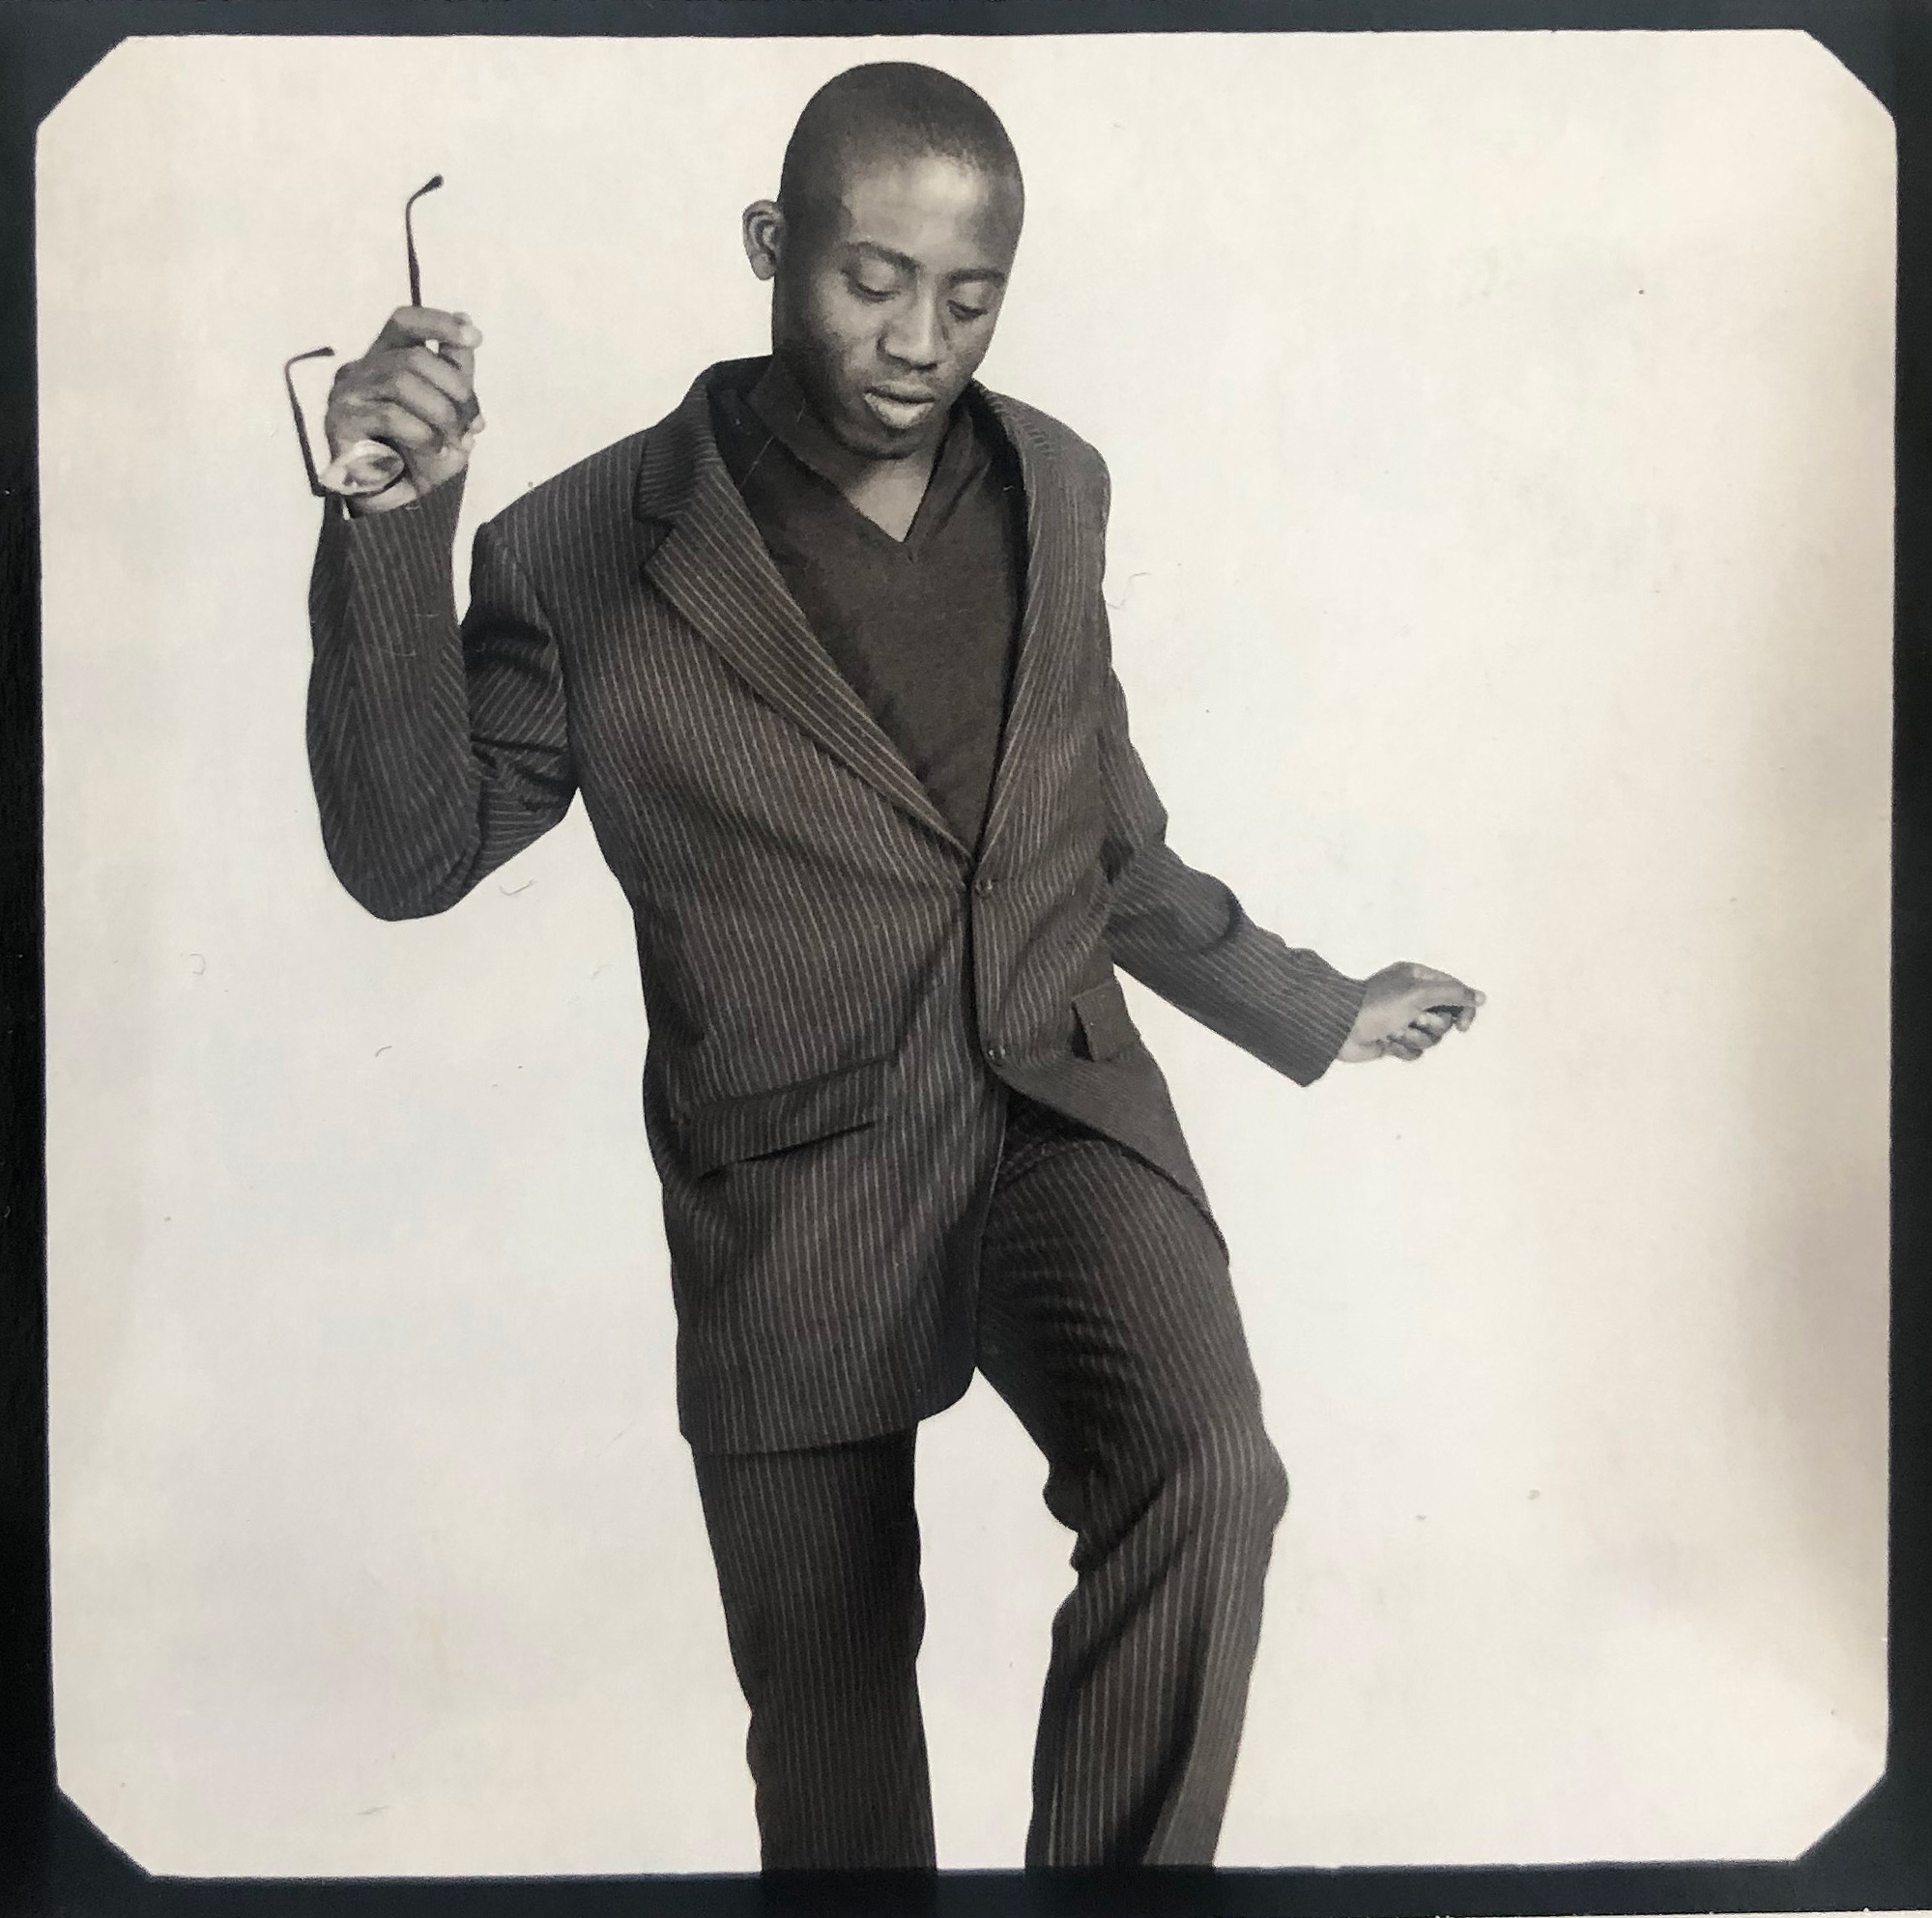 A Polaroid of Enninful in the 1990s from his personal collection. (Courtesy Edward Enninful)